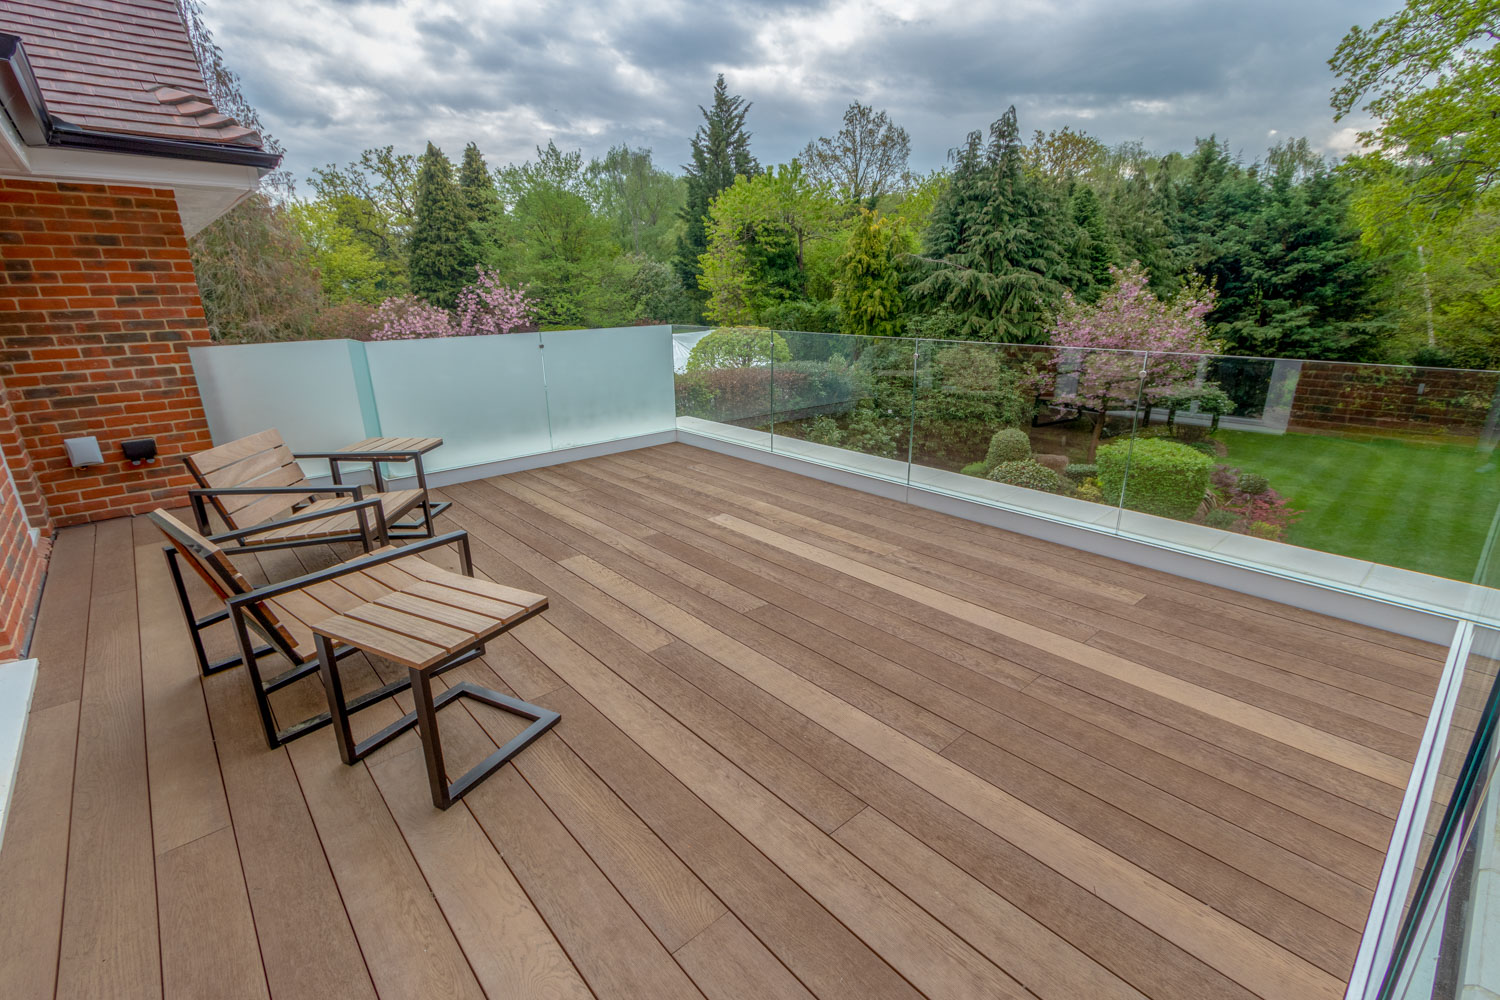 Timber or Composite Decking